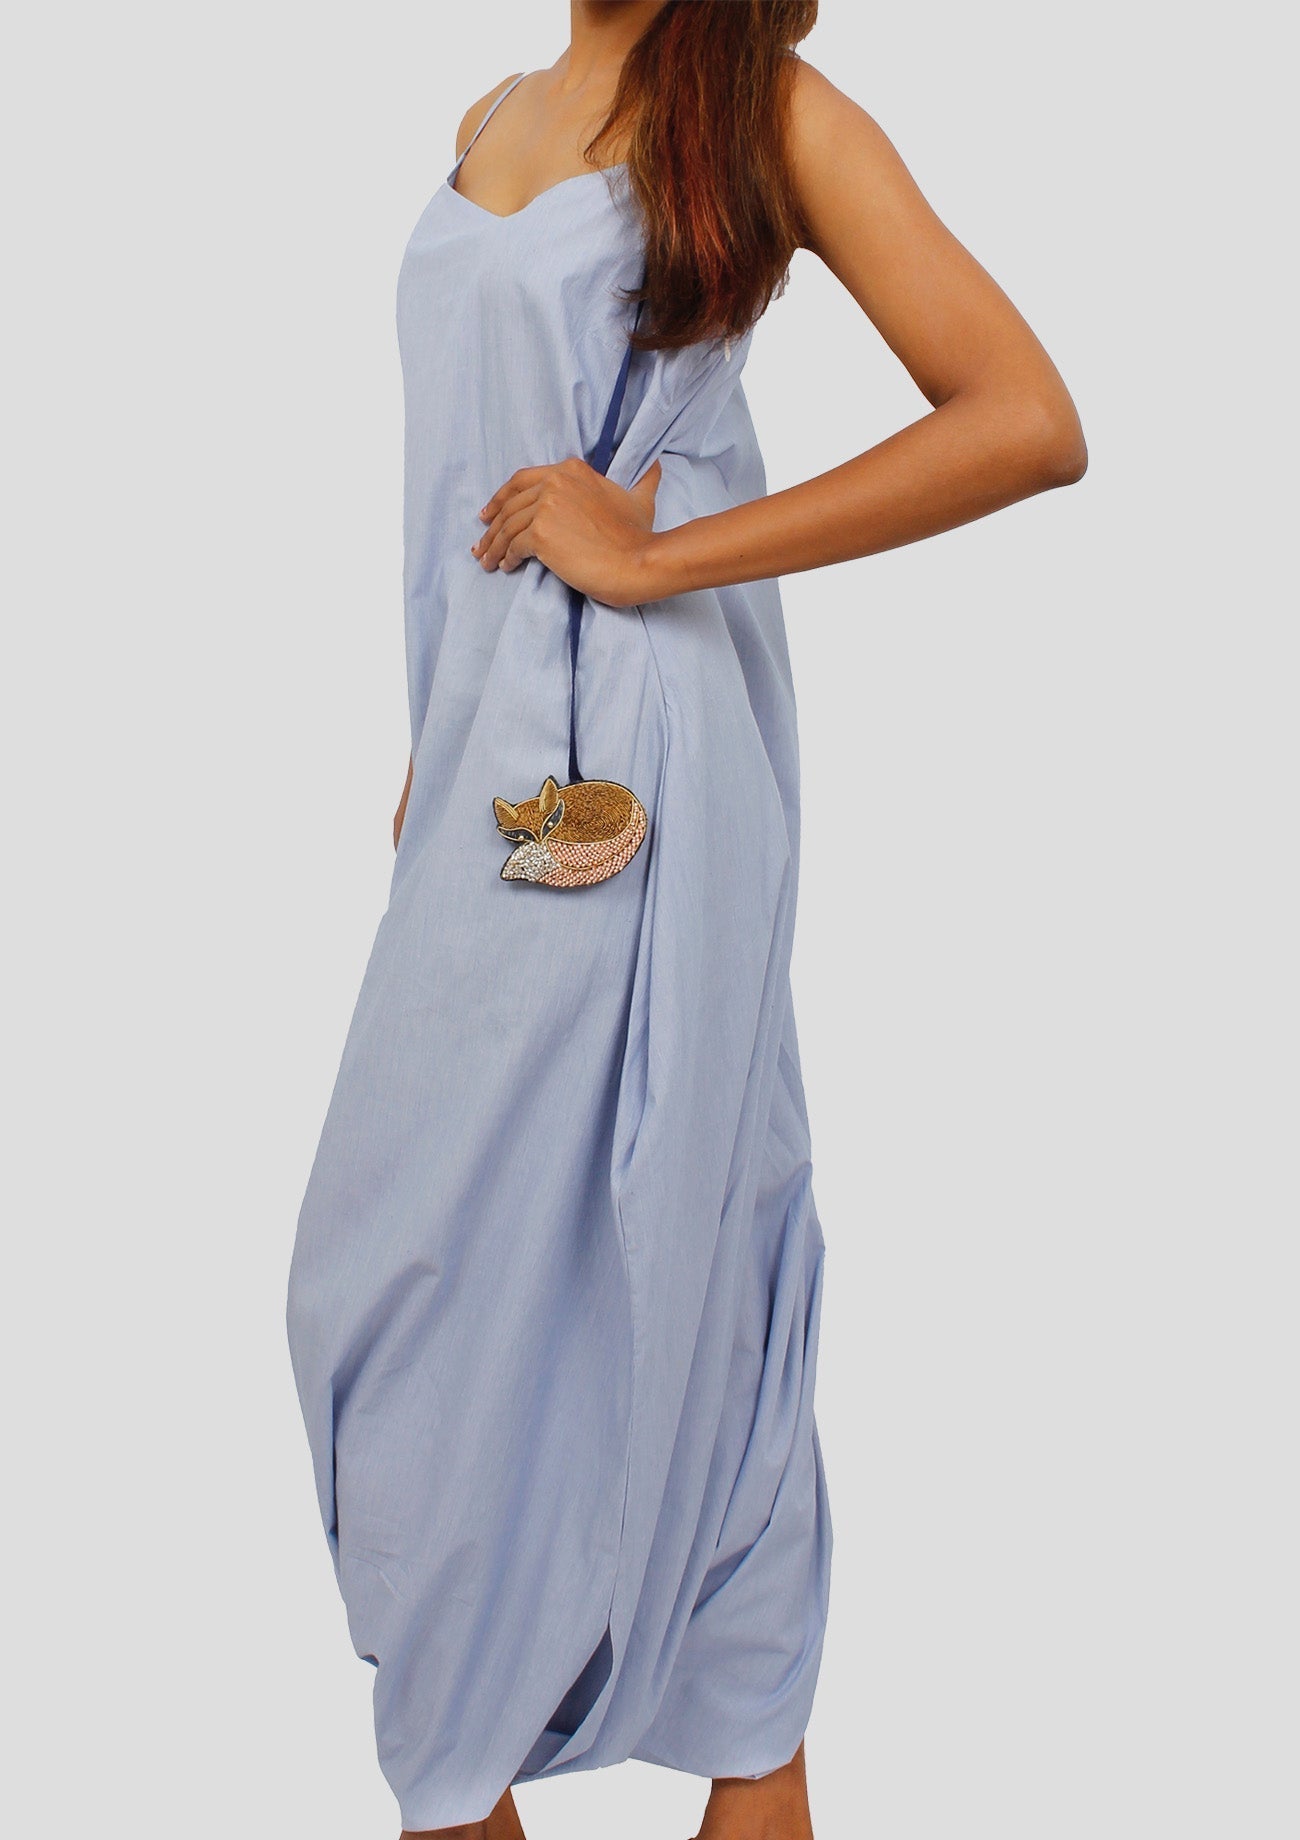 Sky Blue Cotton Jumpsuit With Detachable Embroidered Dangler